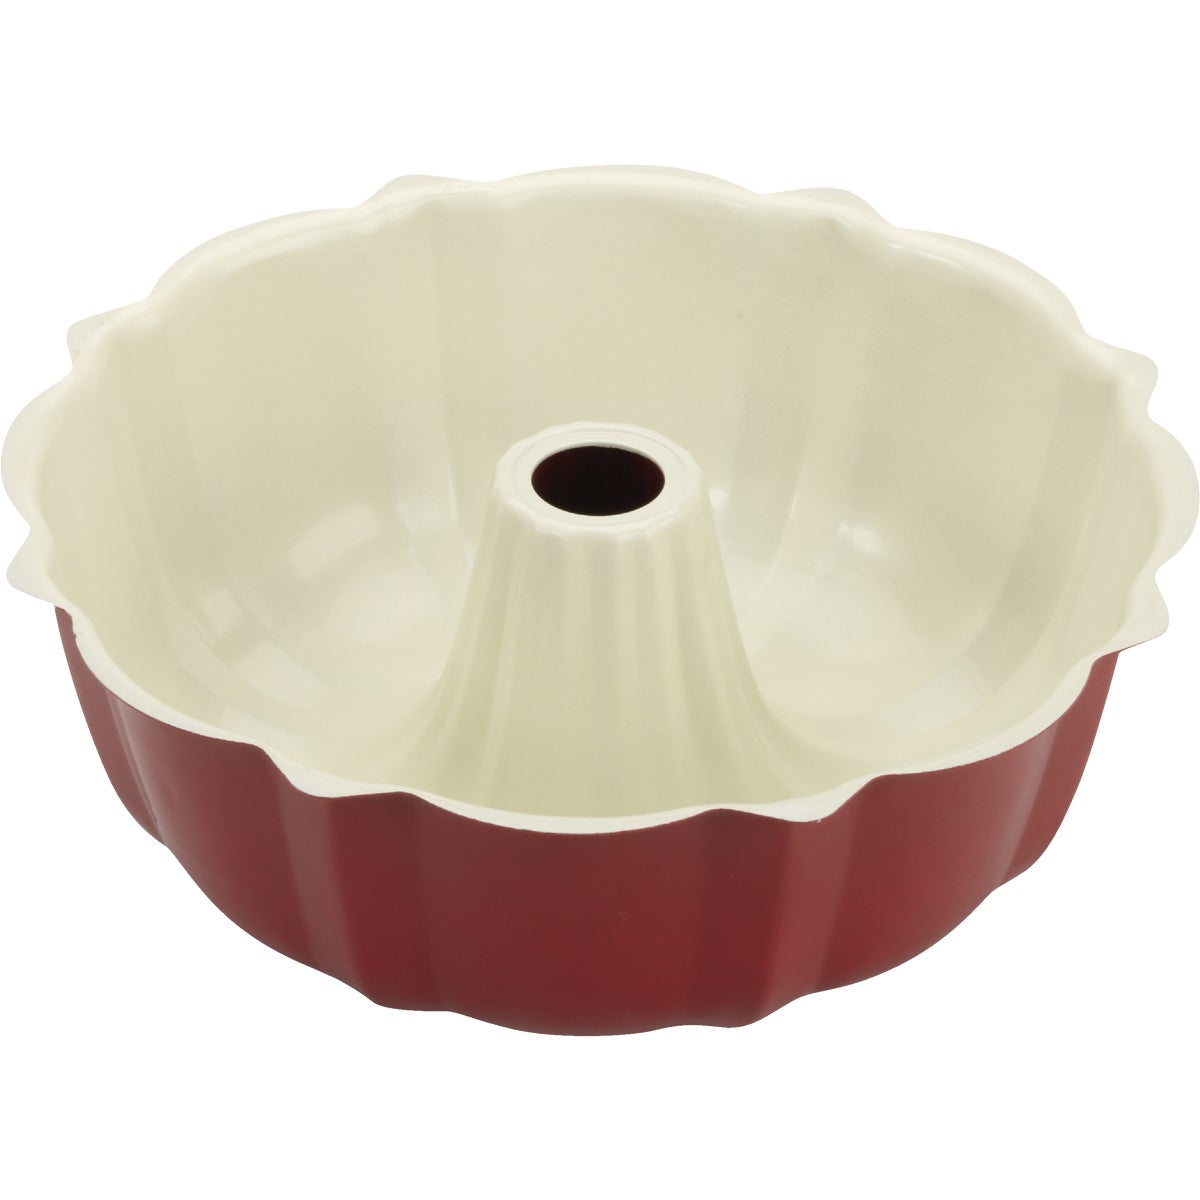 Goodcook 9-1/2 In. Dia. x 3-1/4 In. D. Fluted Non-Stick Bundt Cake Pan